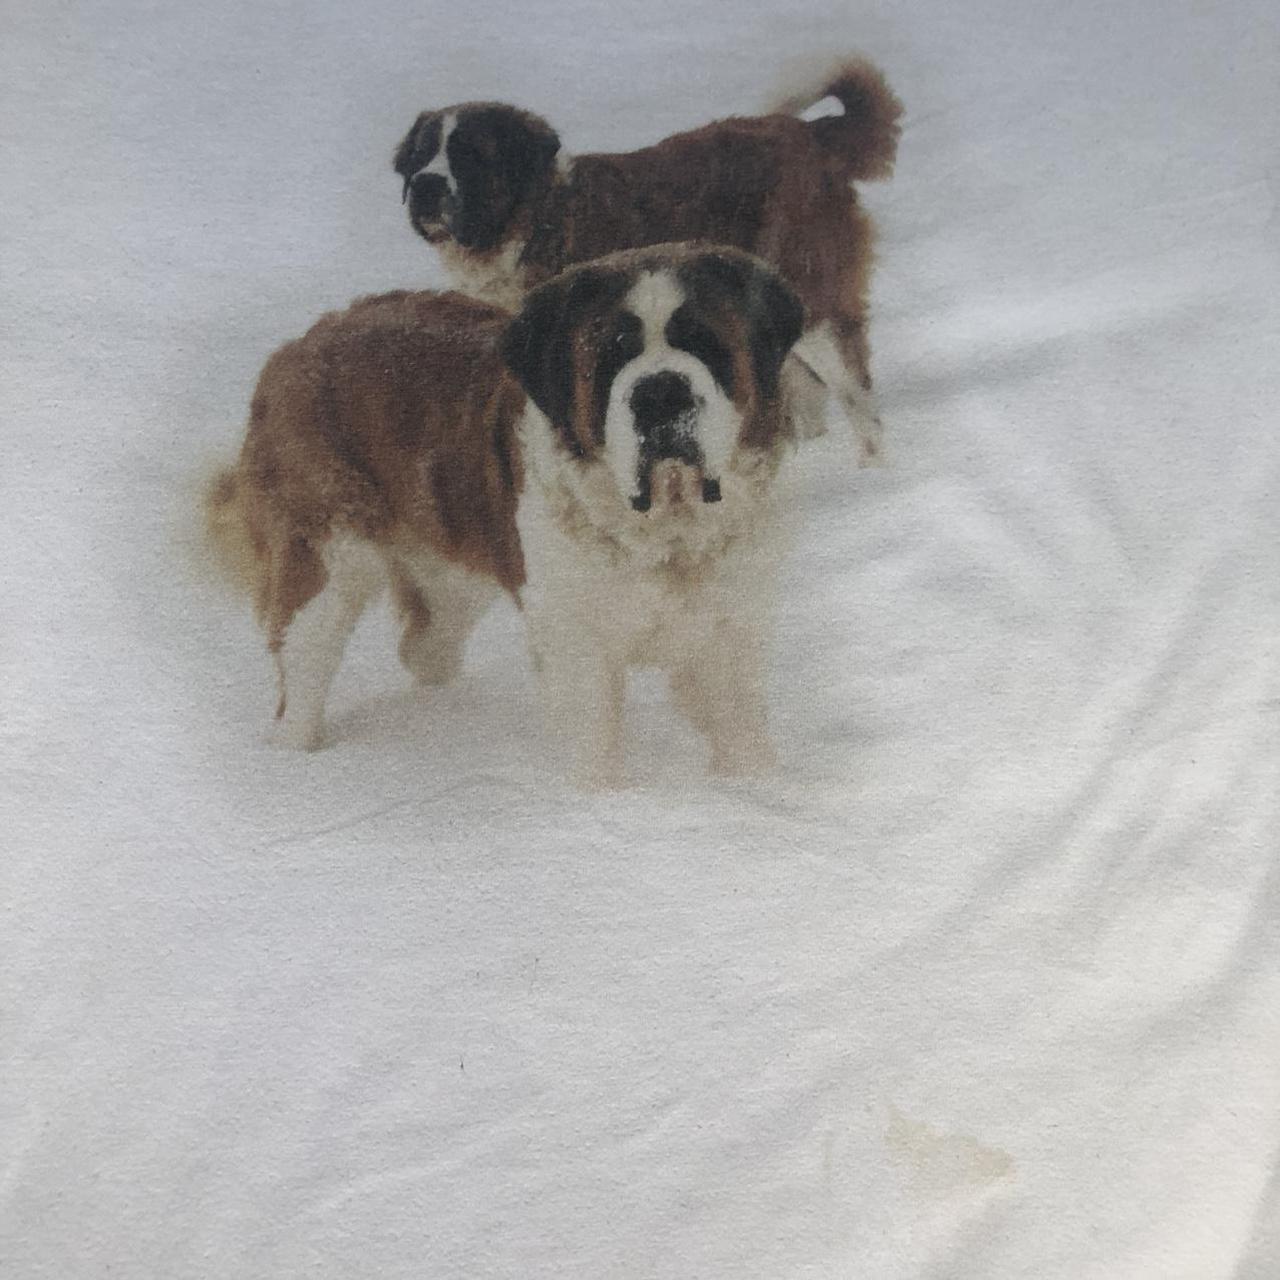 Product Image 3 - Vintage Dog Graphic T-shirt. This